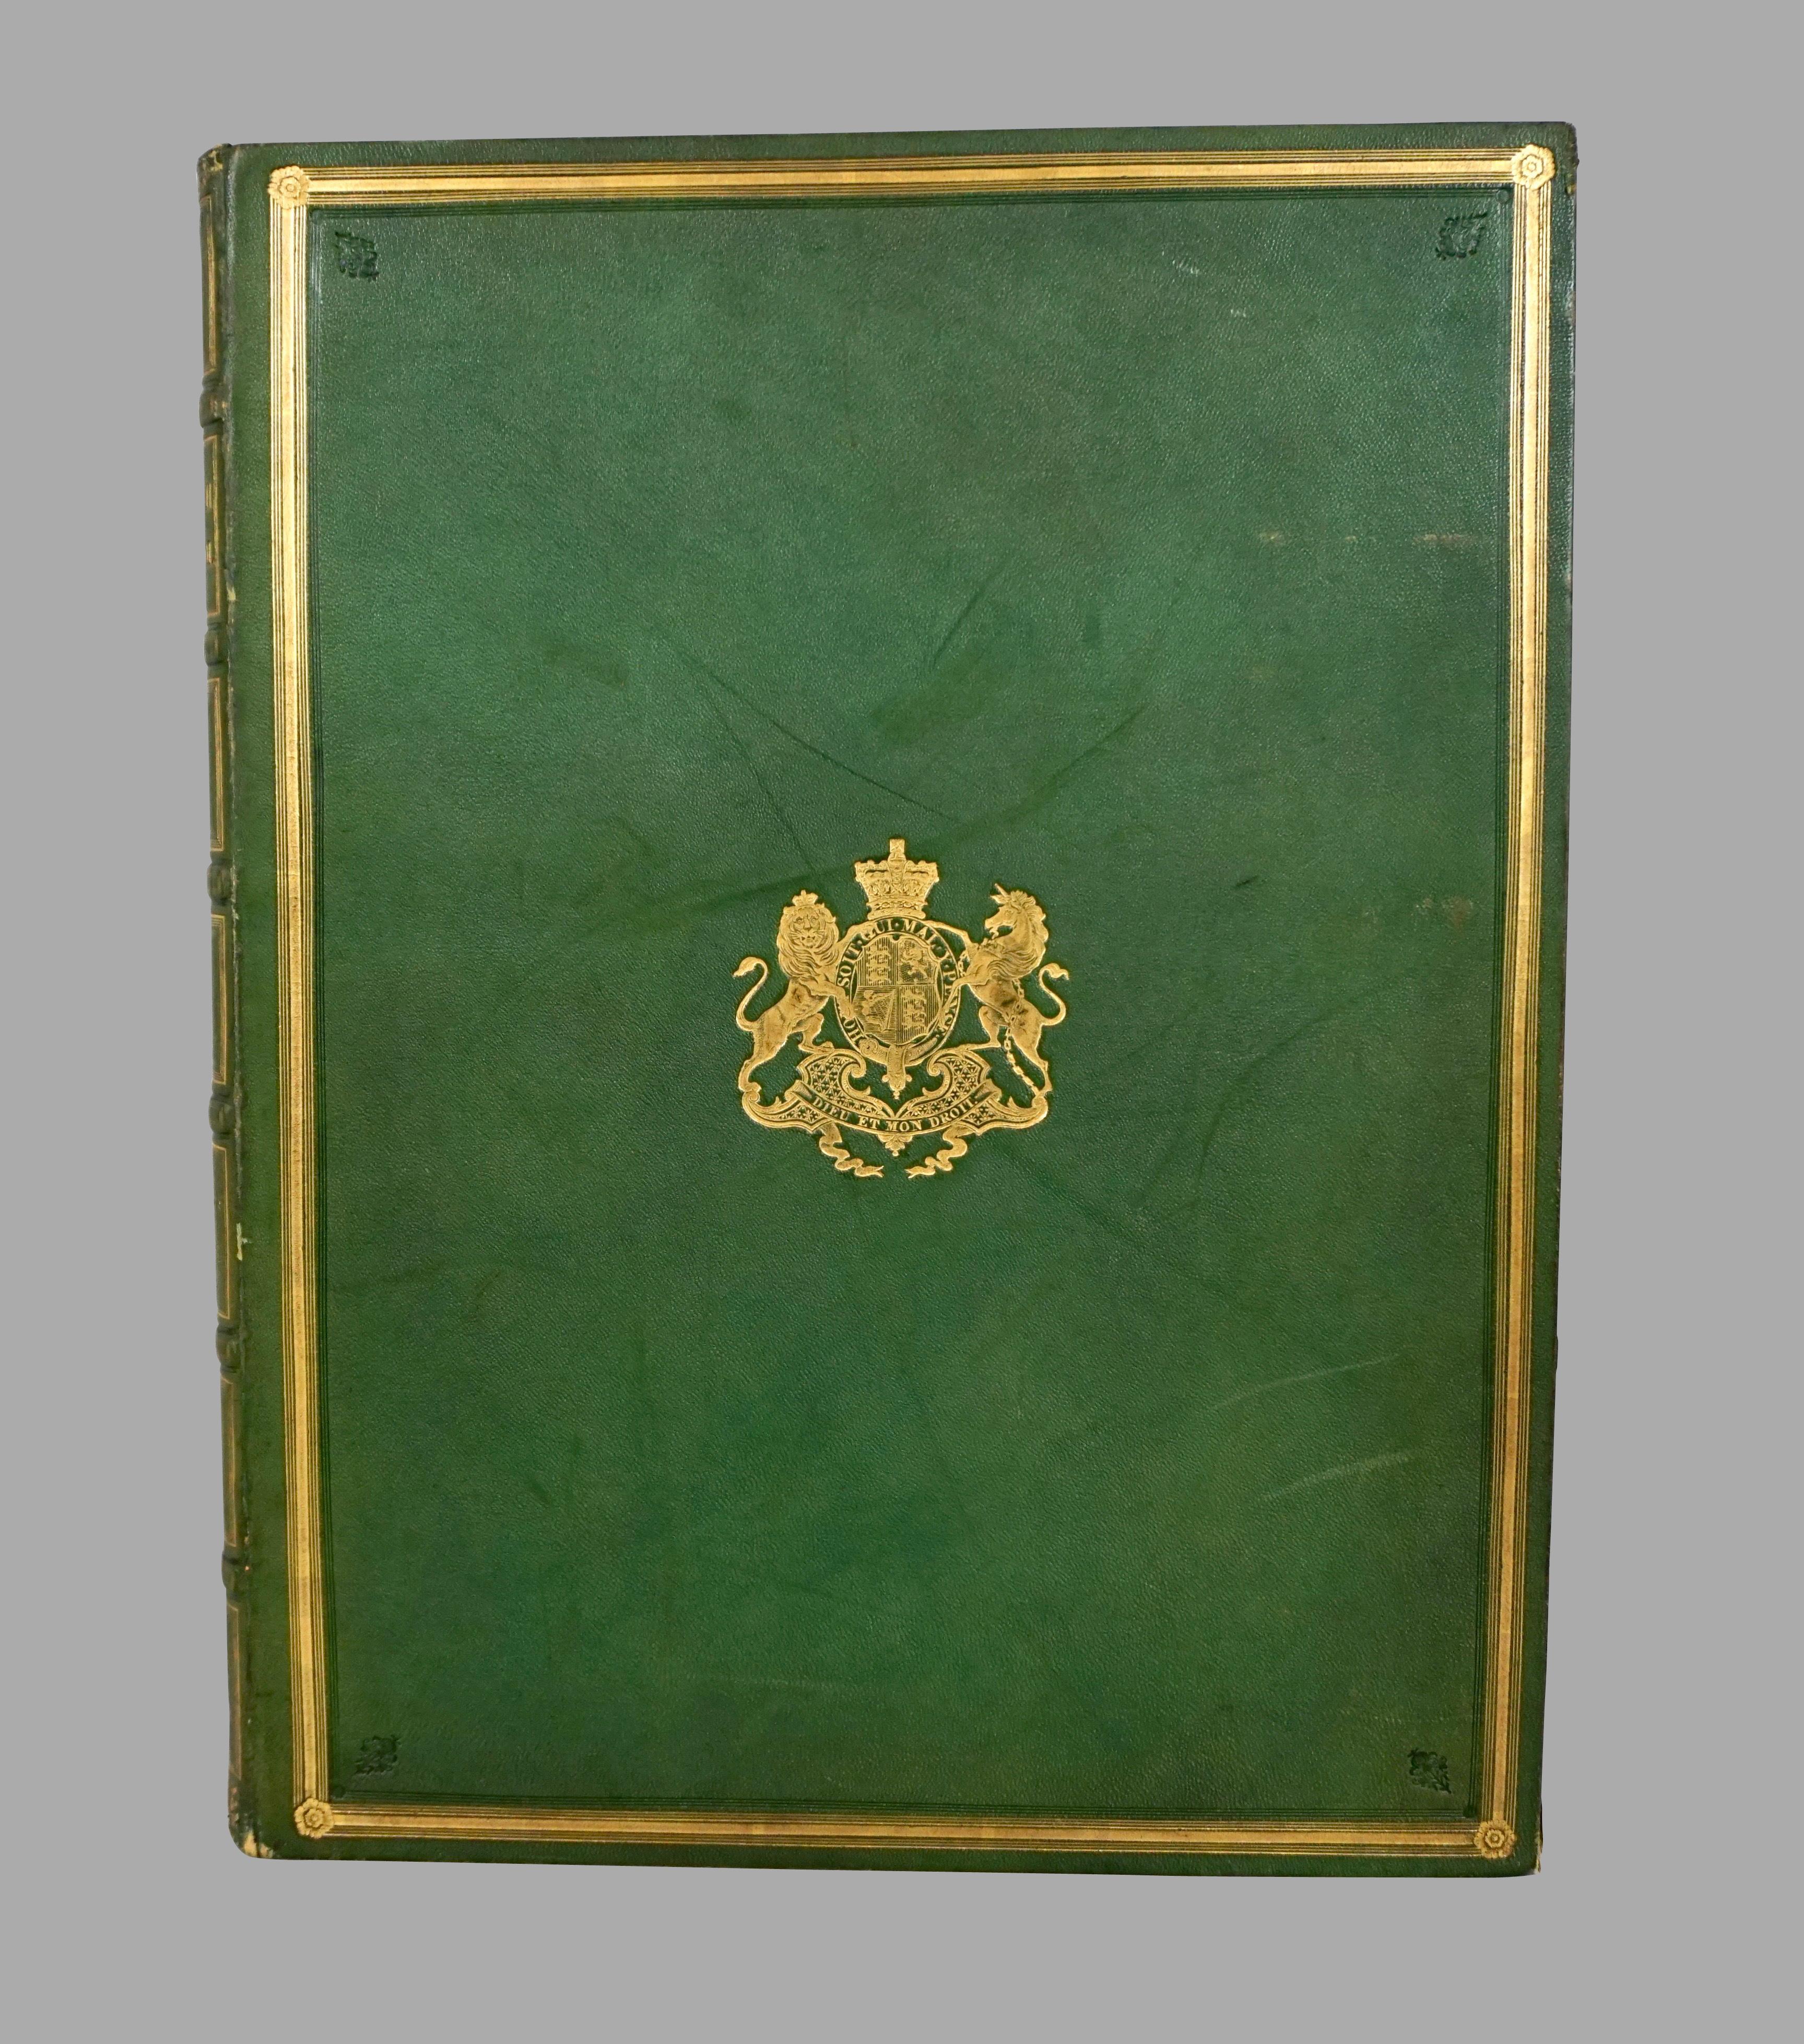 19th Century Green Morocco Leather Elephant Folio Book Cover Now A Marbleized Paper Lined Box